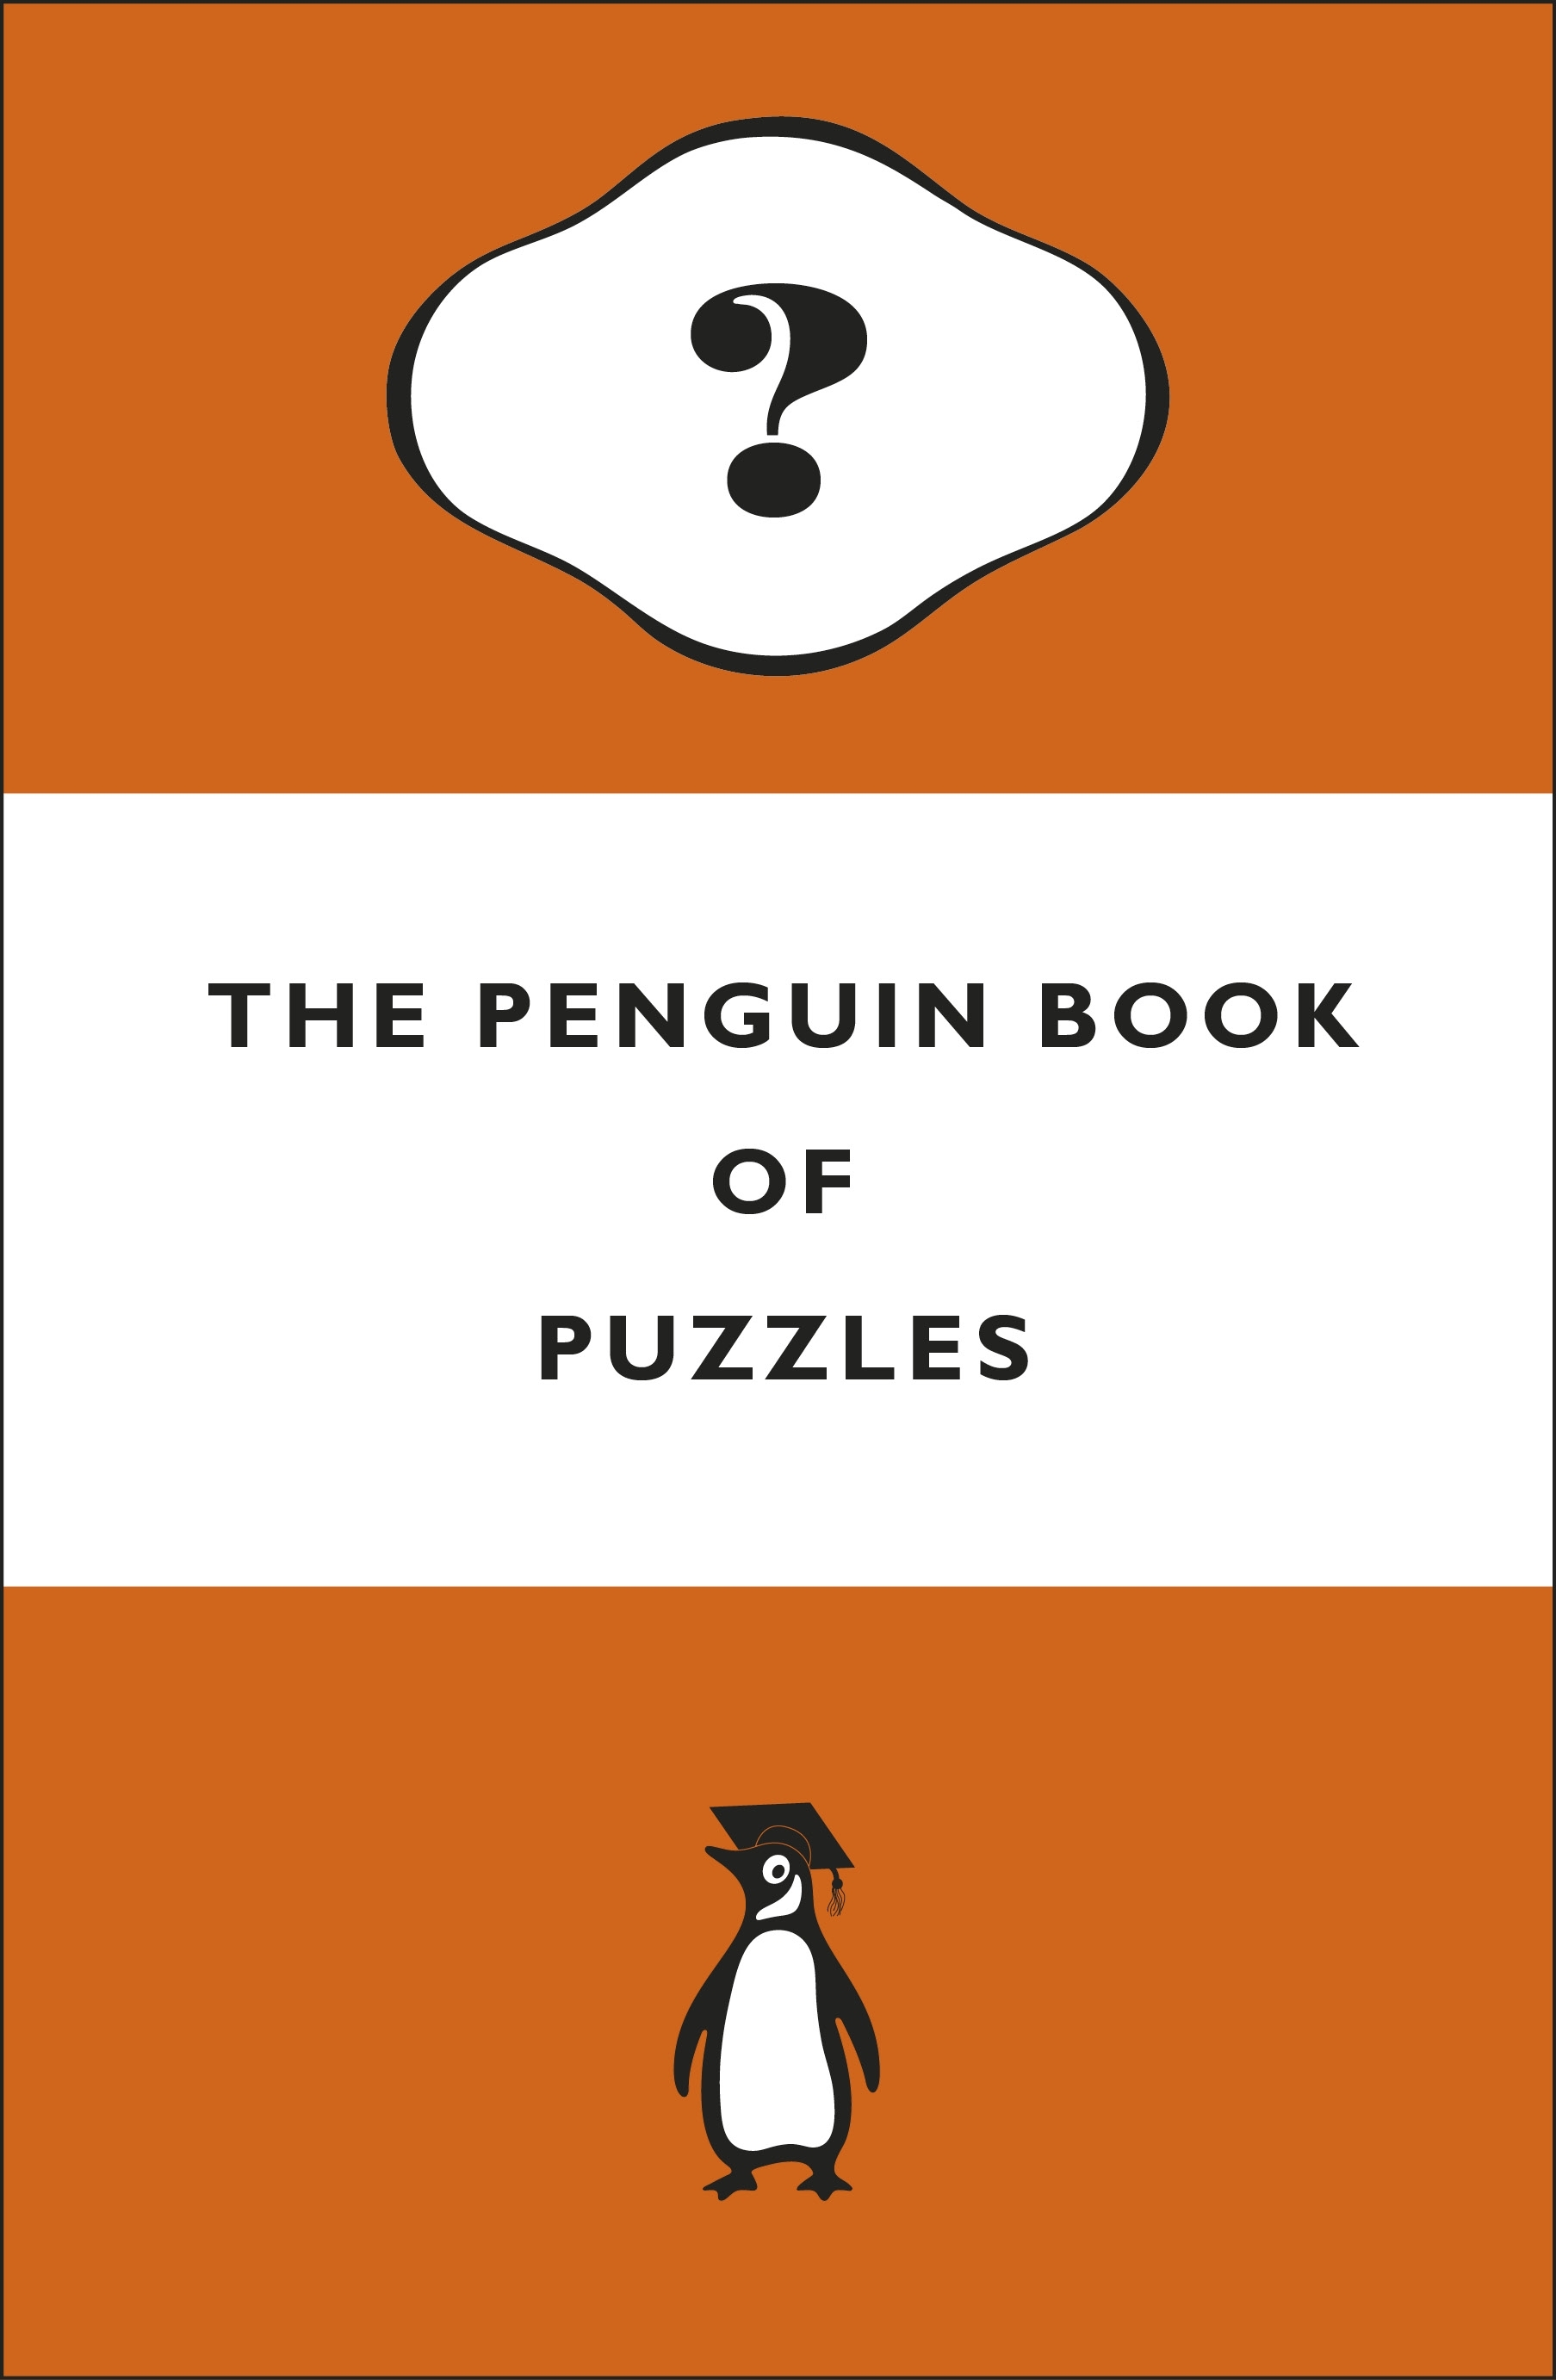 The Penguin Book Of Puzzles Penguin Books New Zealand 5315